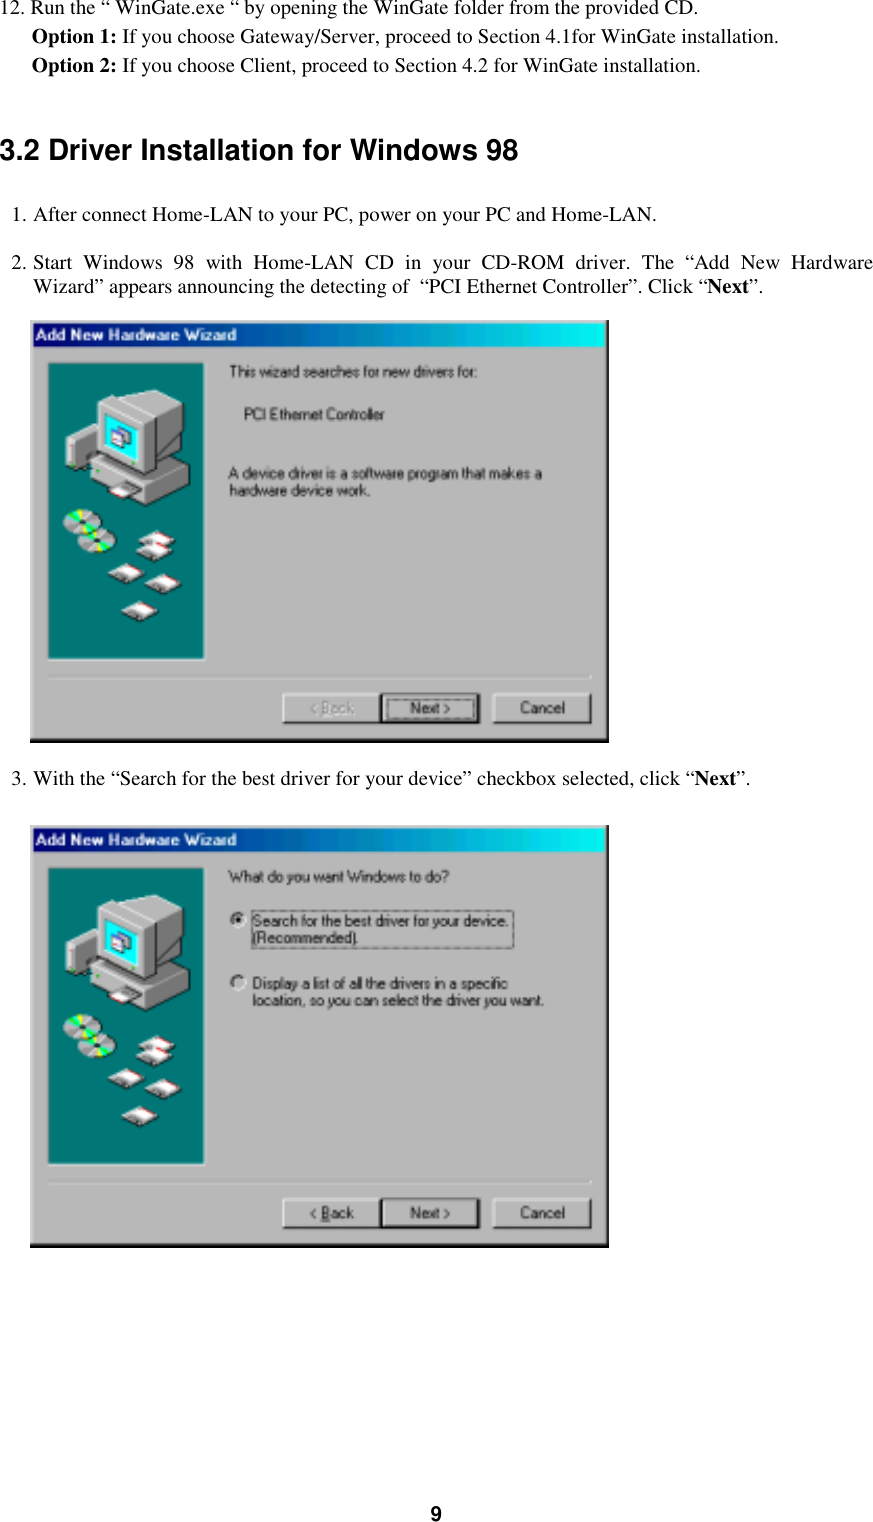 912. Run the “ WinGate.exe “ by opening the WinGate folder from the provided CD.Option 1: If you choose Gateway/Server, proceed to Section 4.1for WinGate installation.Option 2: If you choose Client, proceed to Section 4.2 for WinGate installation.3.2 Driver Installation for Windows 981. After connect Home-LAN to your PC, power on your PC and Home-LAN.2. Start Windows 98 with Home-LAN CD in your CD-ROM driver. The “Add New HardwareWizard” appears announcing the detecting of  “PCI Ethernet Controller”. Click “Next”.3. With the “Search for the best driver for your device” checkbox selected, click “Next”.